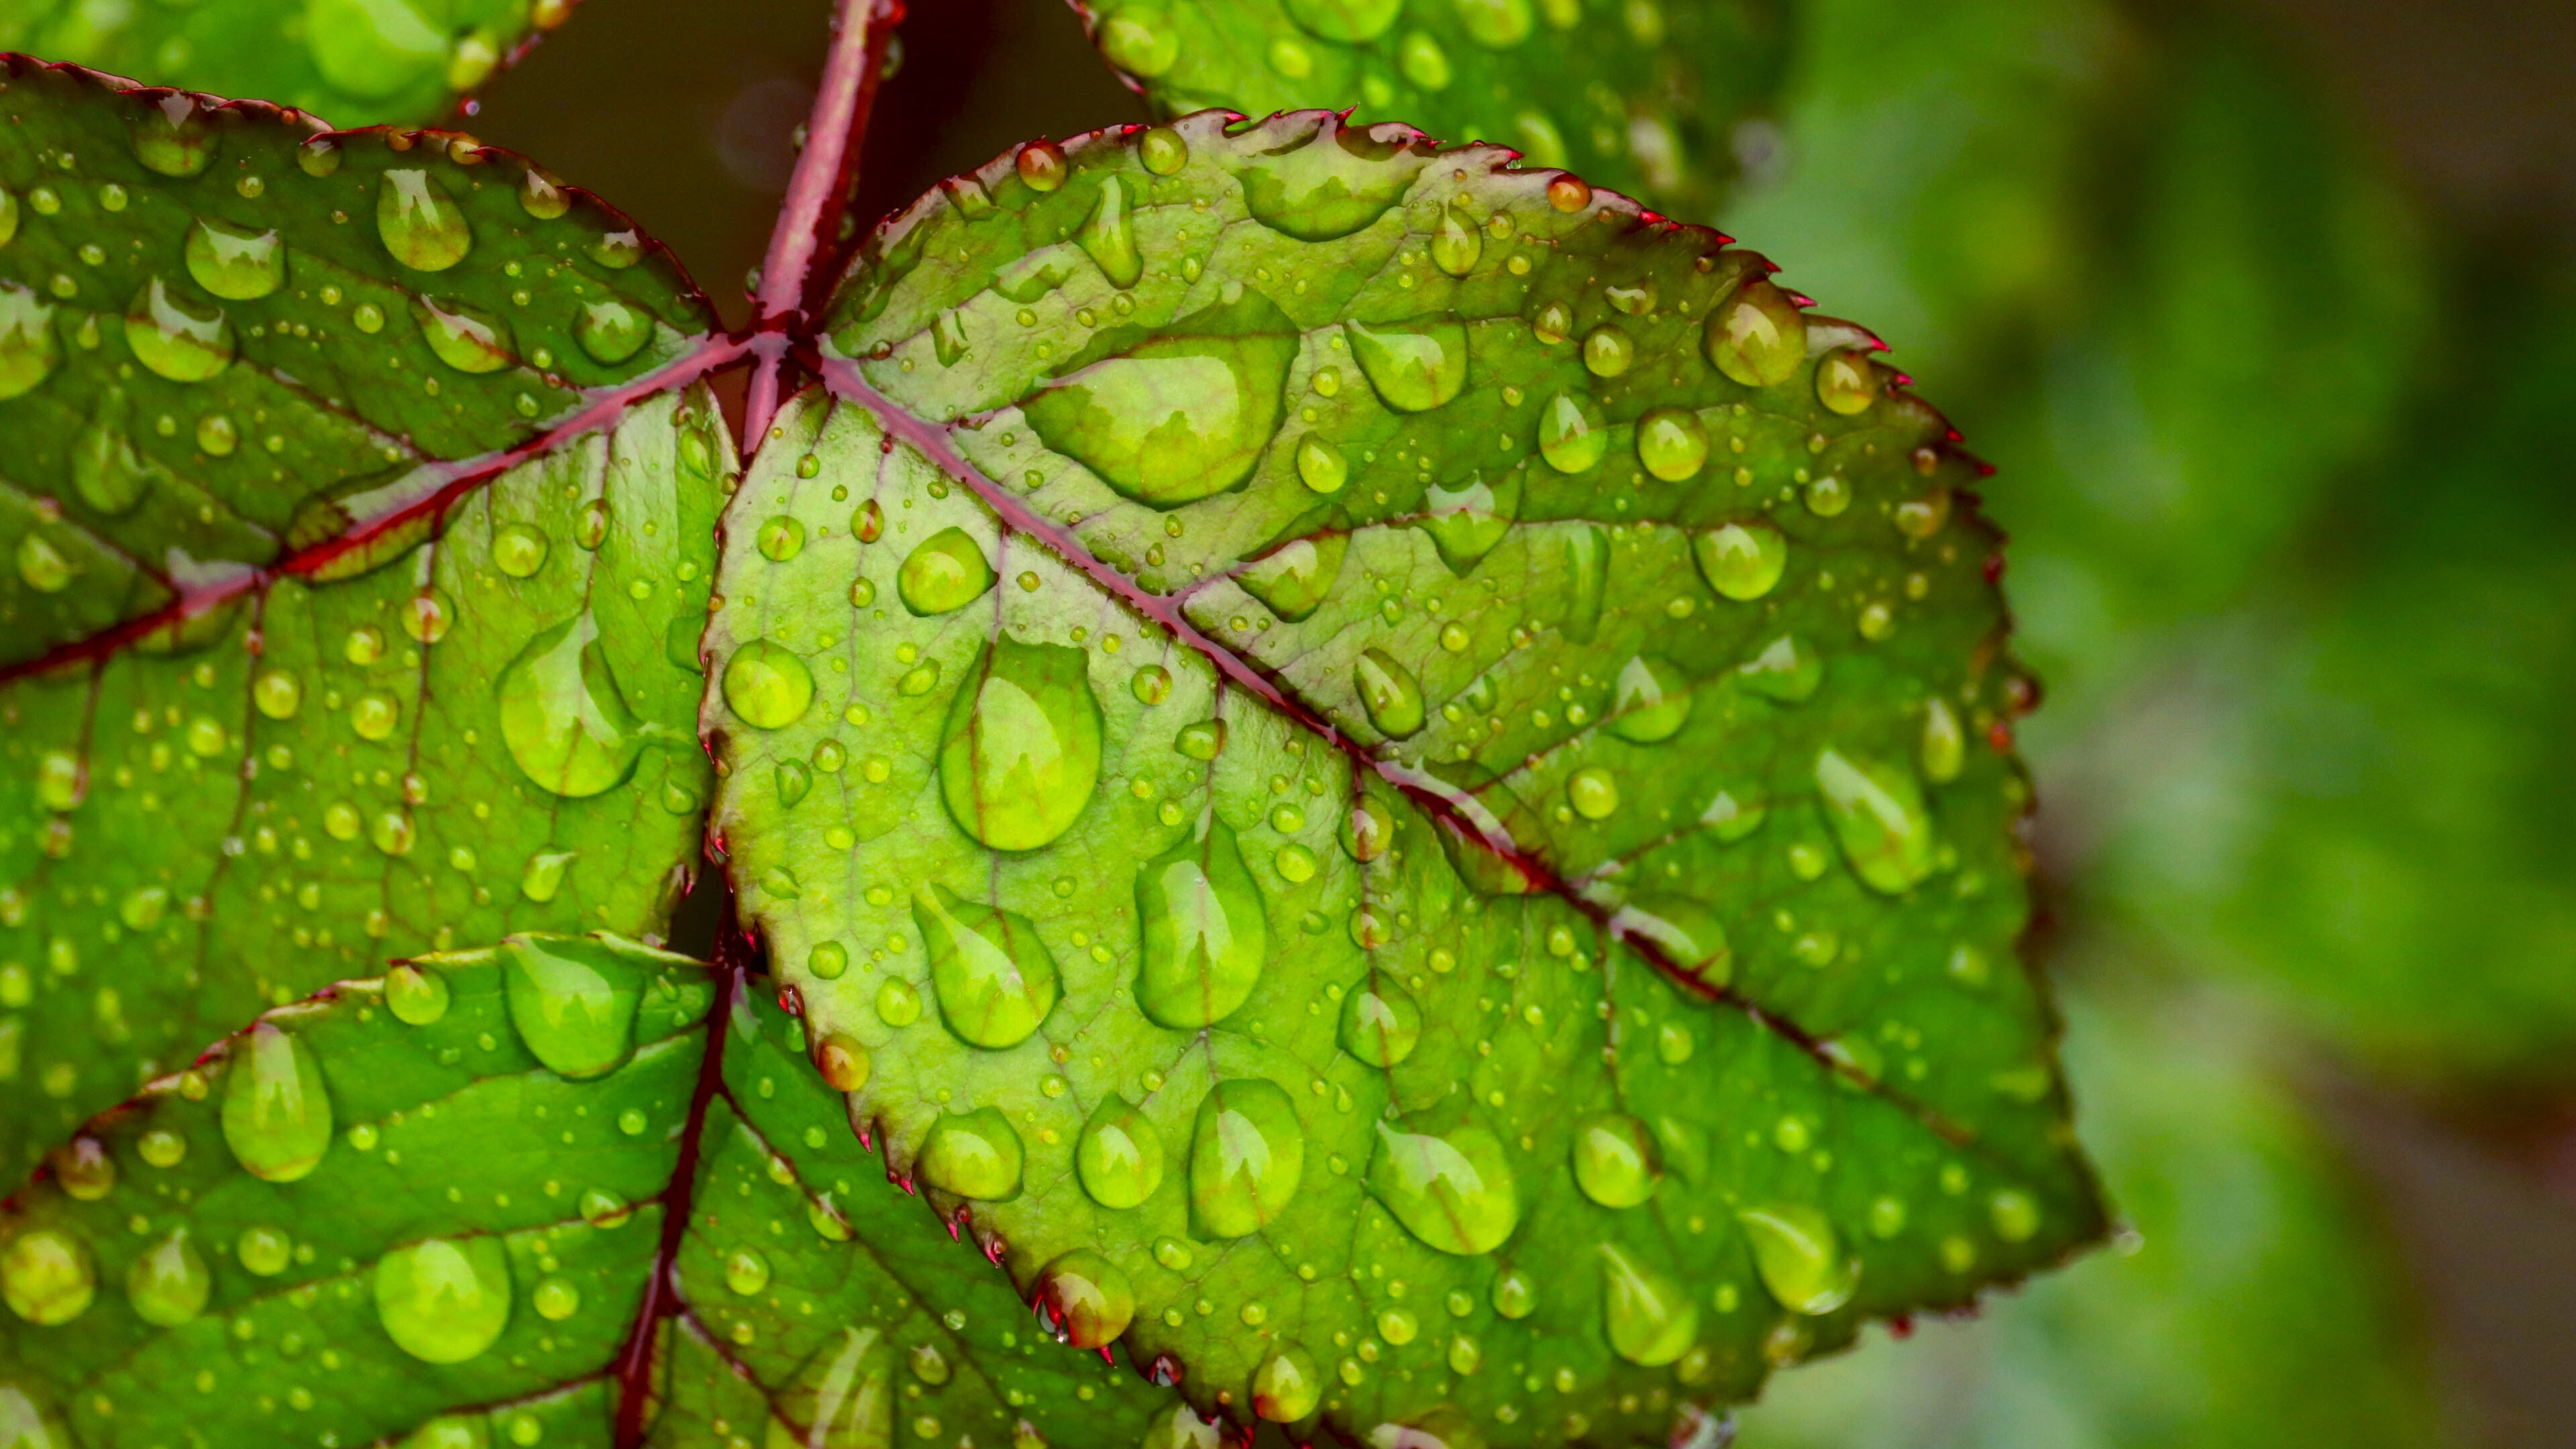 Go Green: Water droplets on green leaf, Drops of moisture, A clean and green environment. 3840x2160 4K Wallpaper.